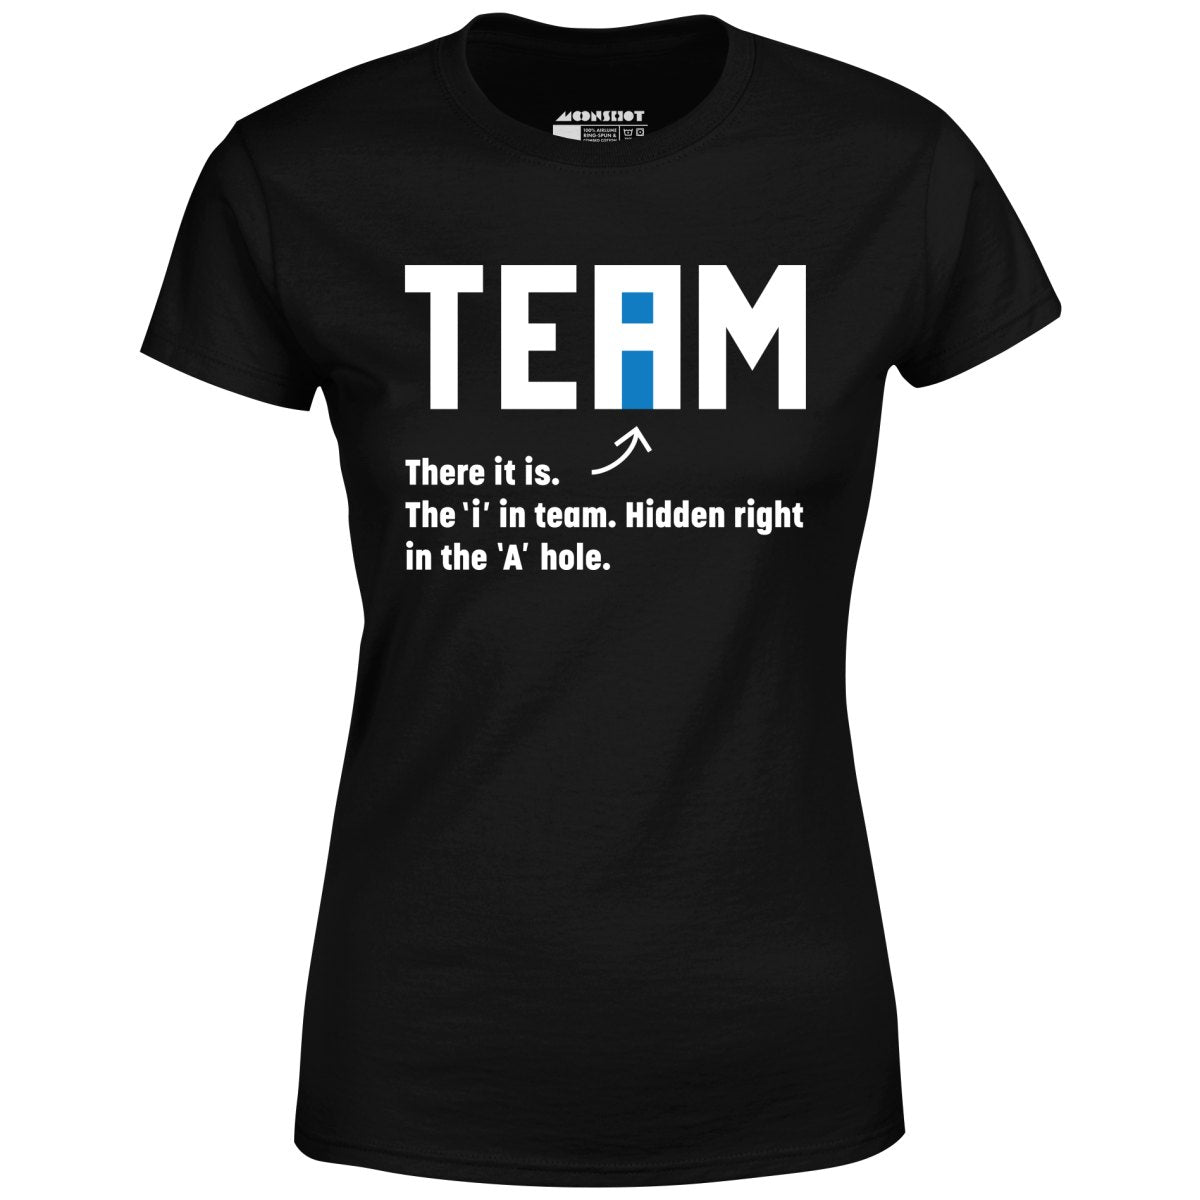 The I in Team - Women's T-Shirt